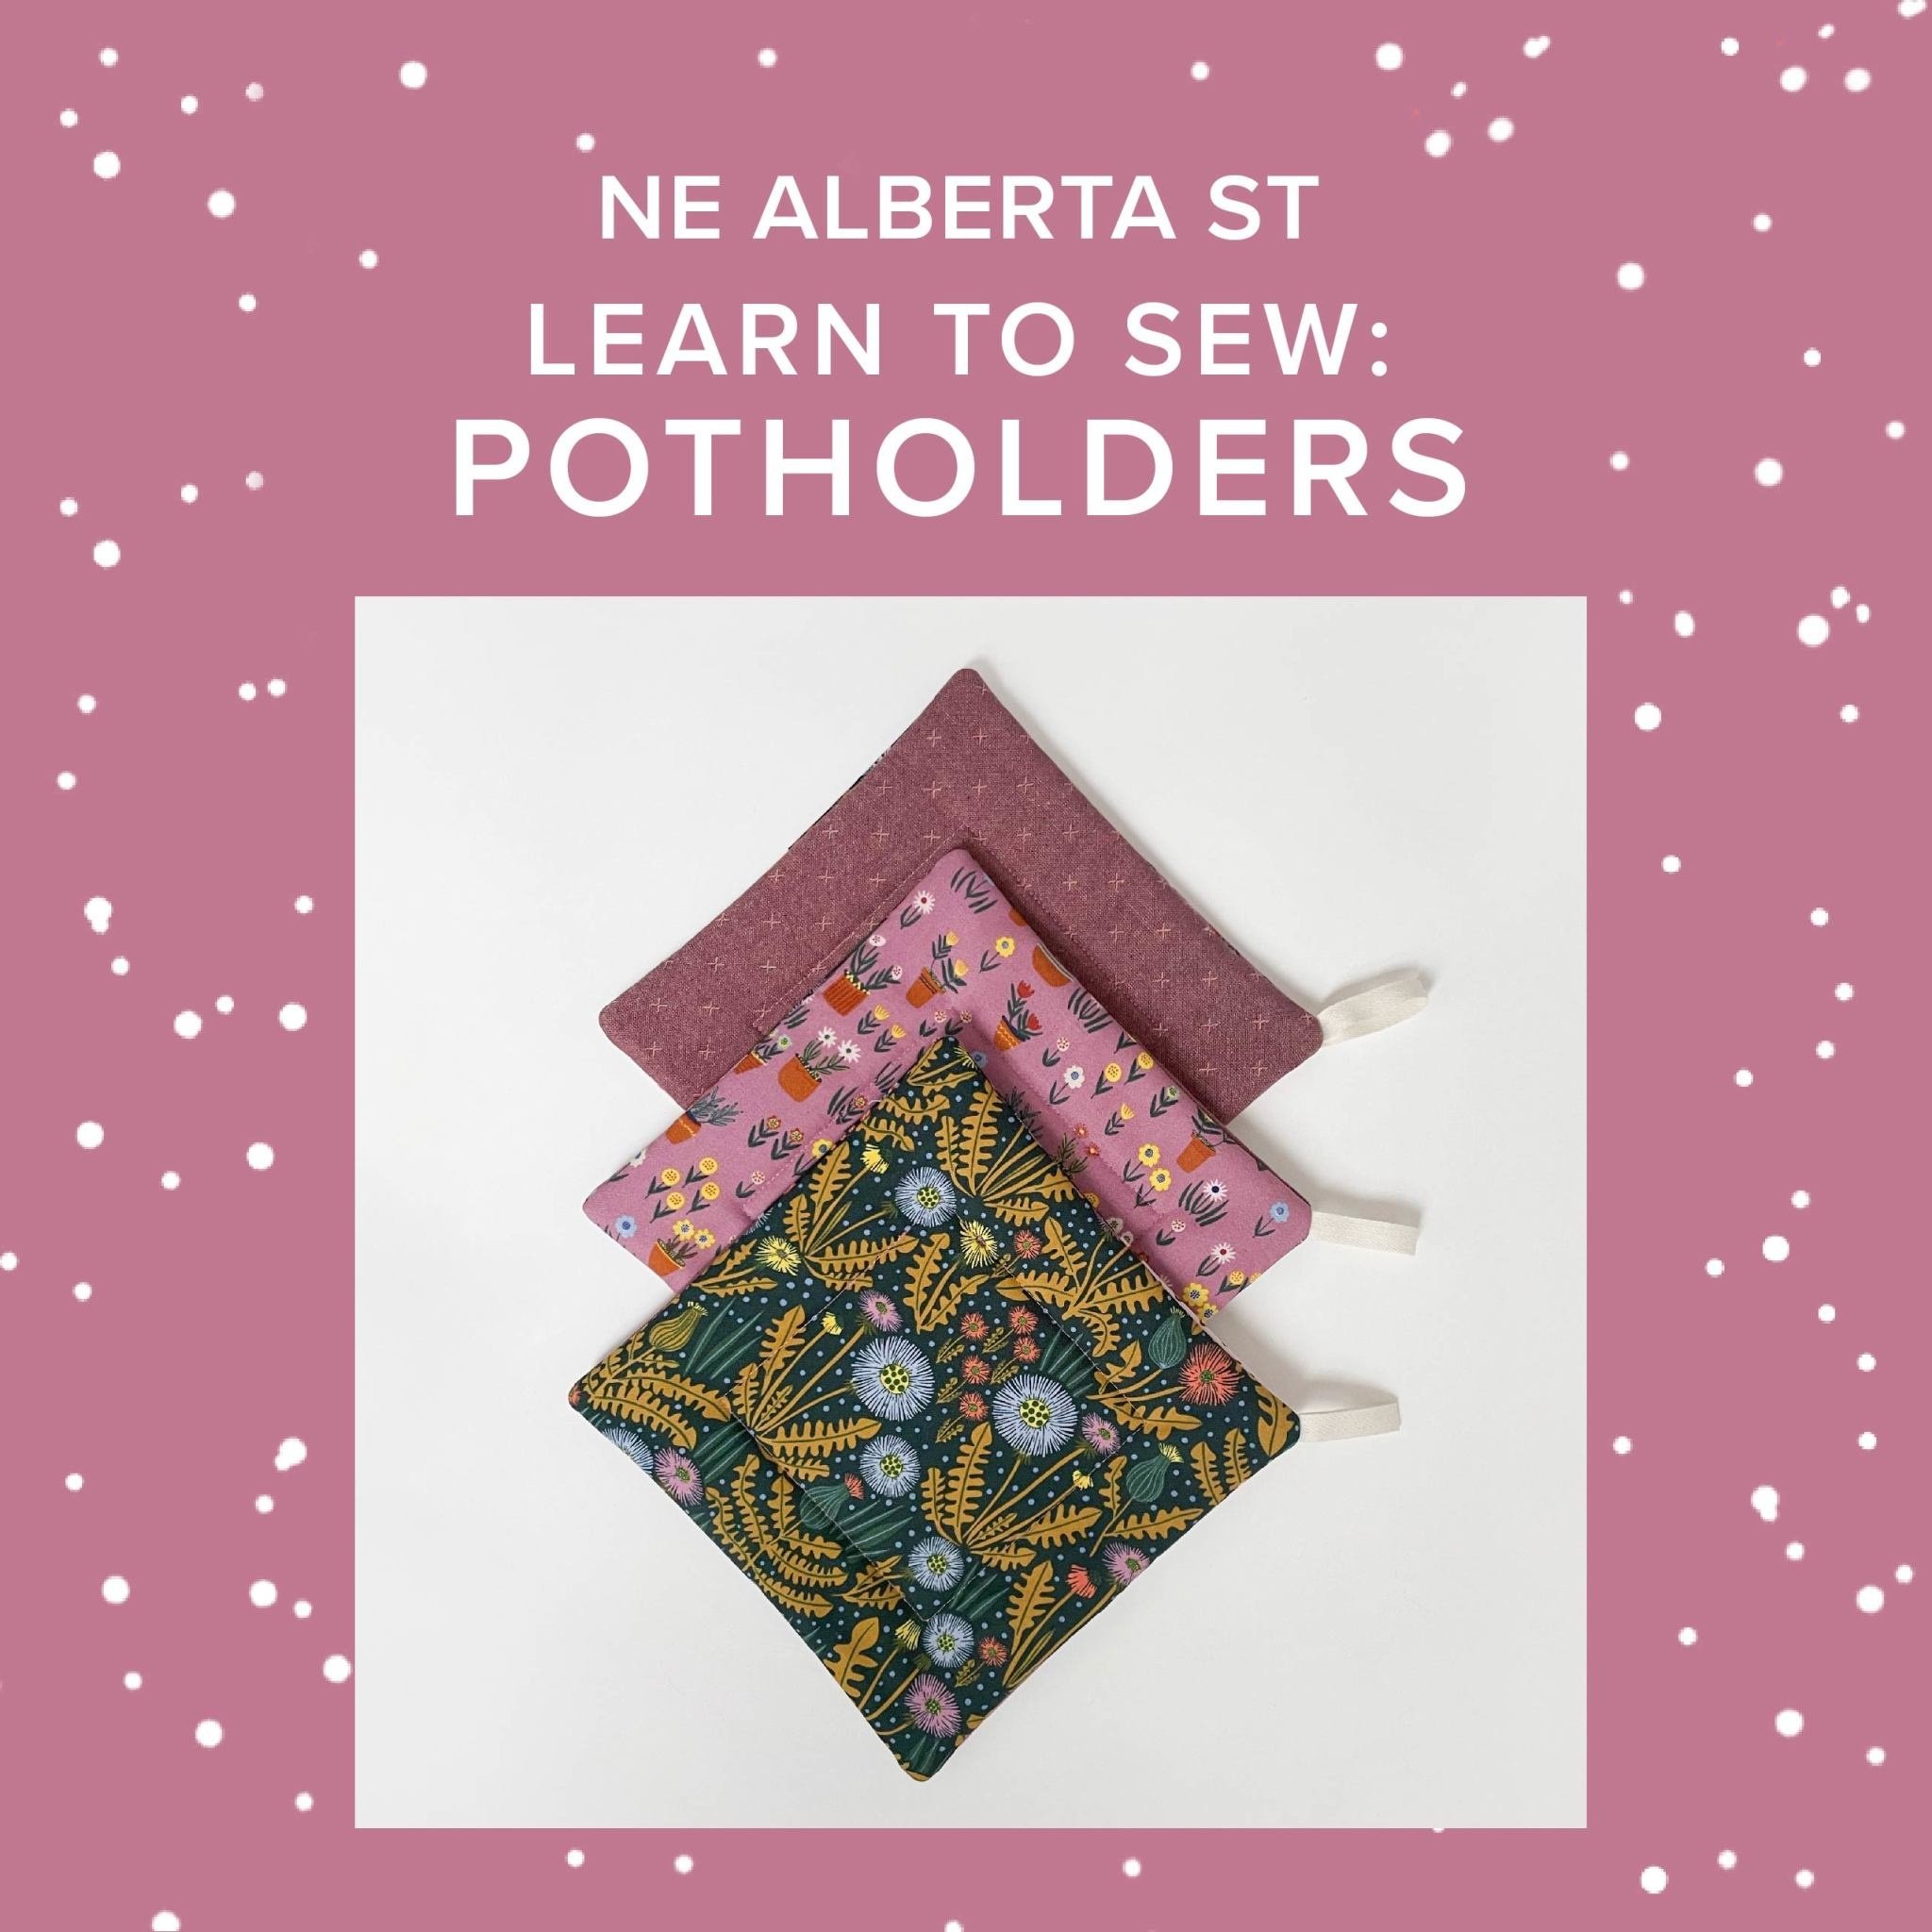 Chloe Costello Learn to Sew: Quick and Easy Potholders, Wednesday, May 22nd, 5pm-8pm